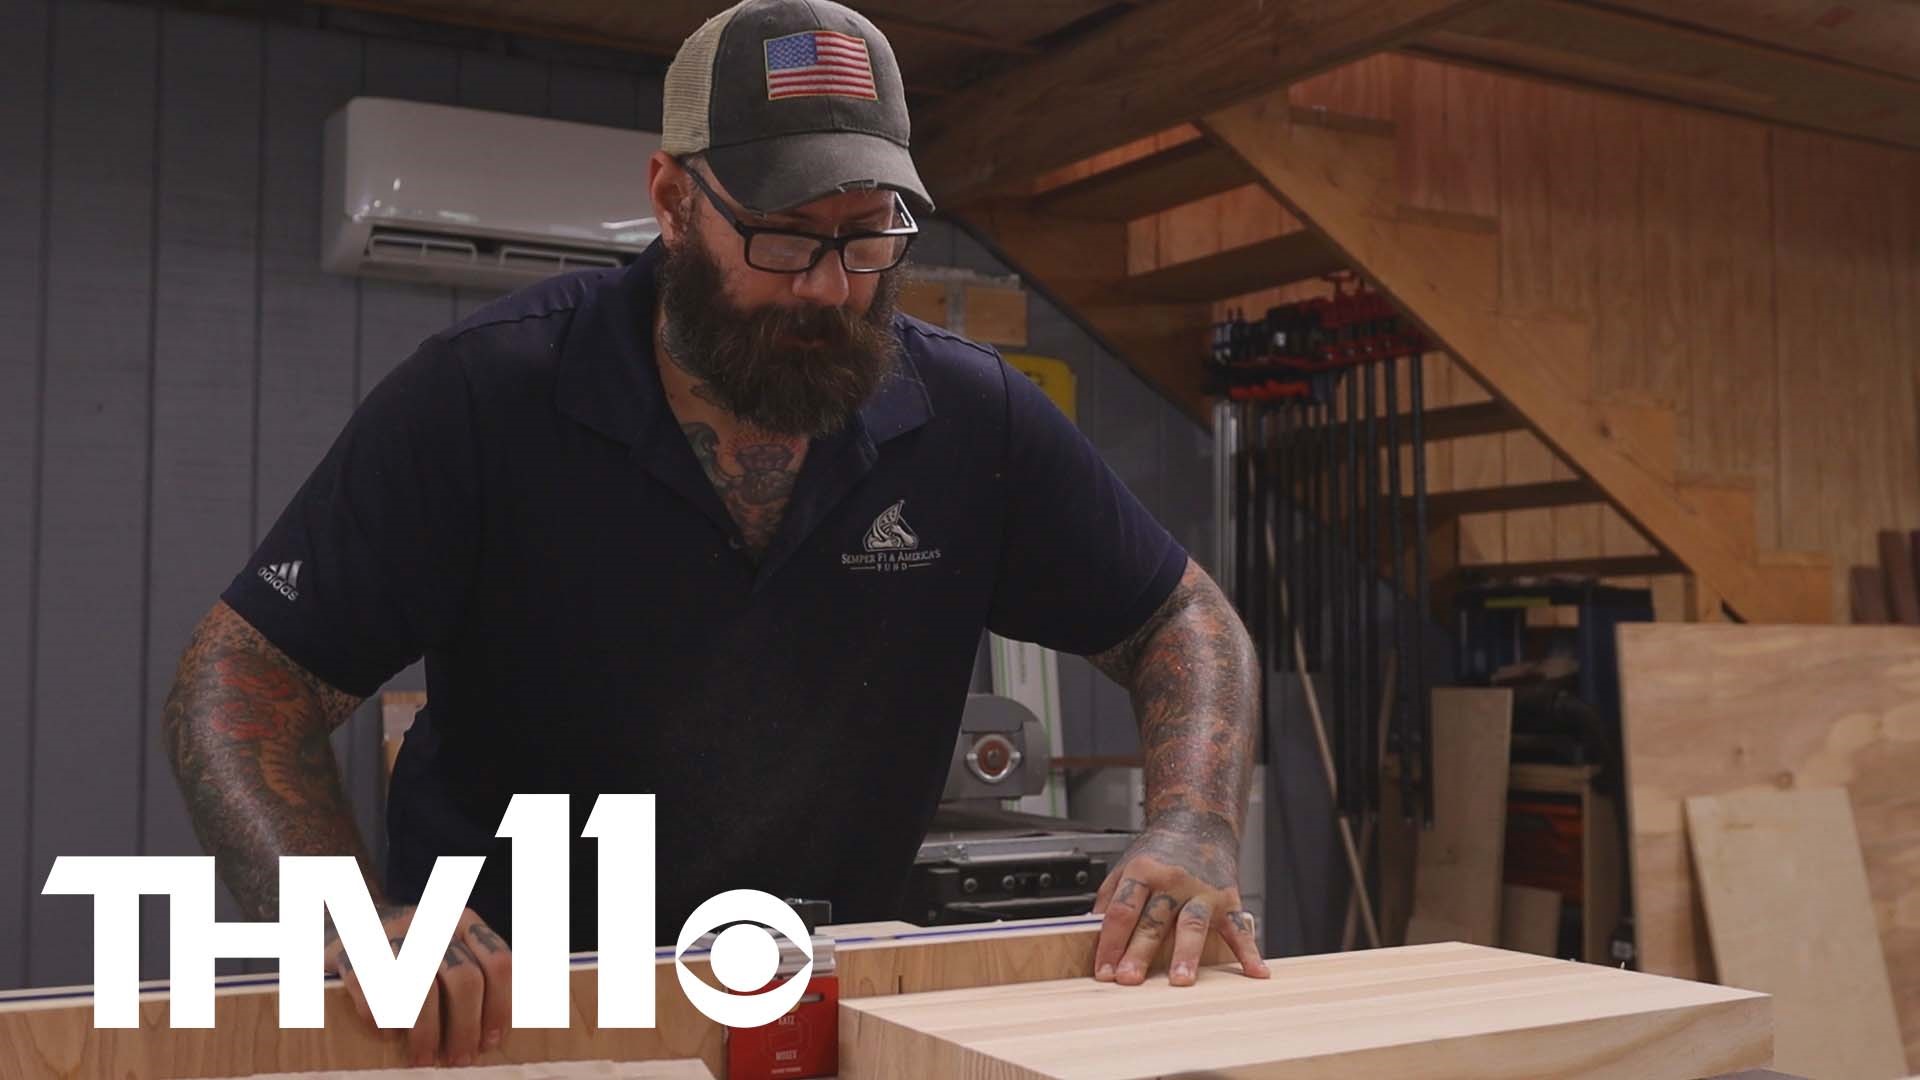 Kyle Cox connected with the nonprofit Semper Fi & America's Fund where his passion for woodworking became his new business.